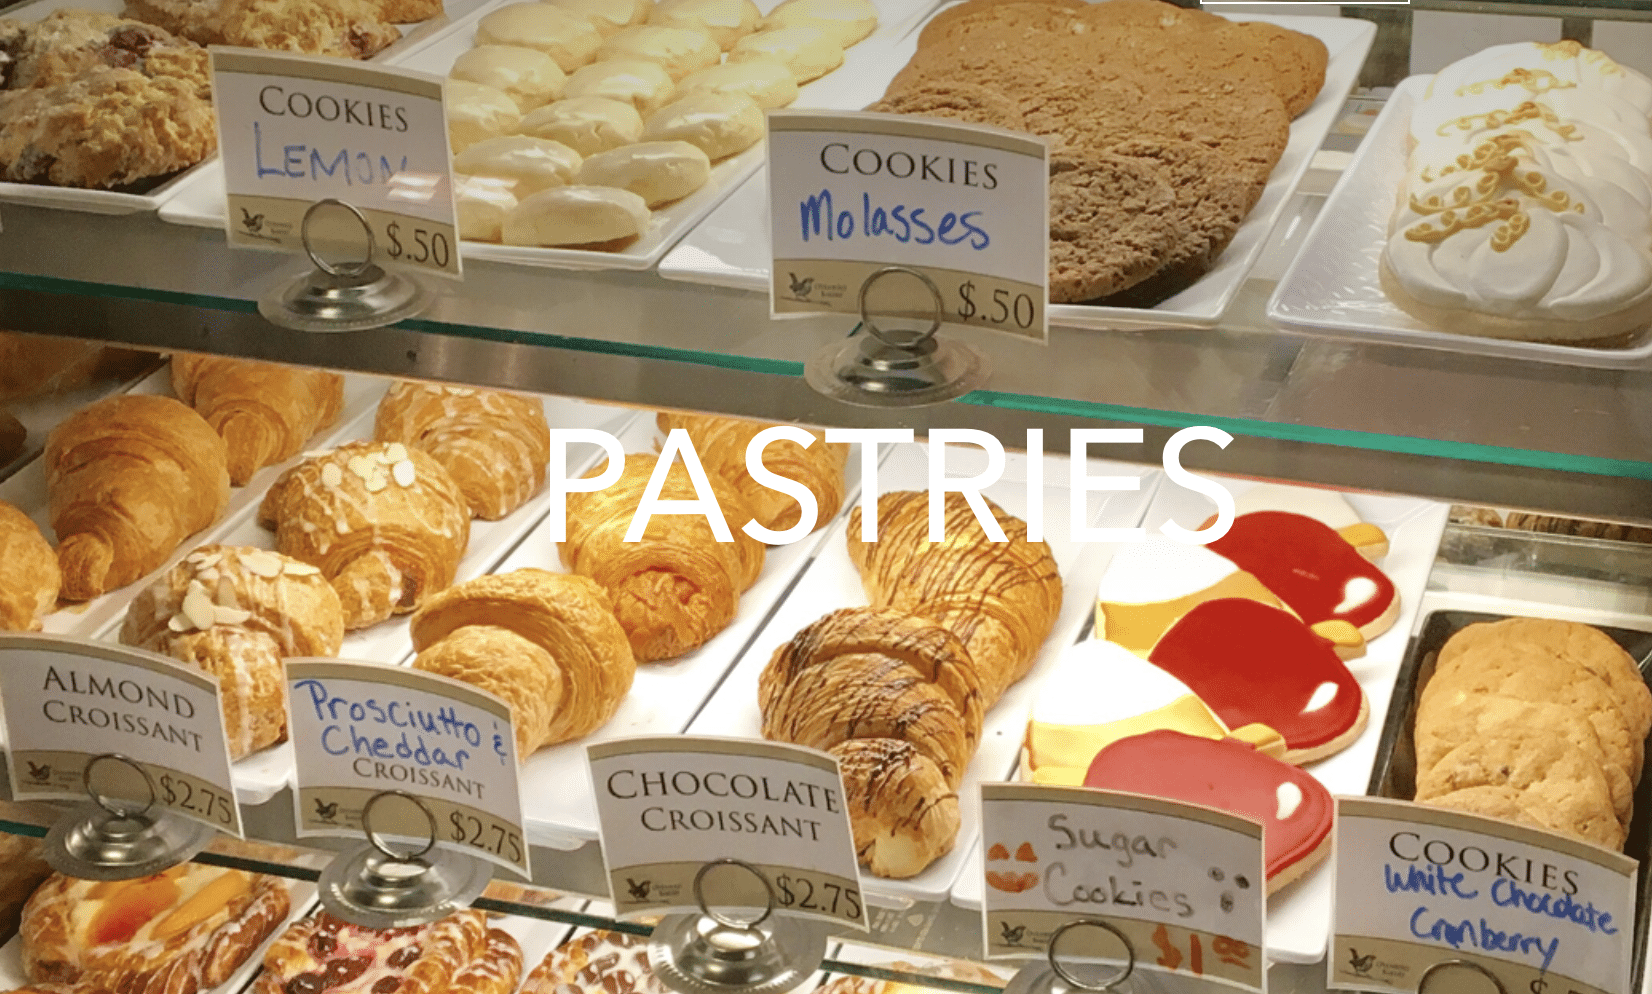 display of pastries at Overbird Bakery